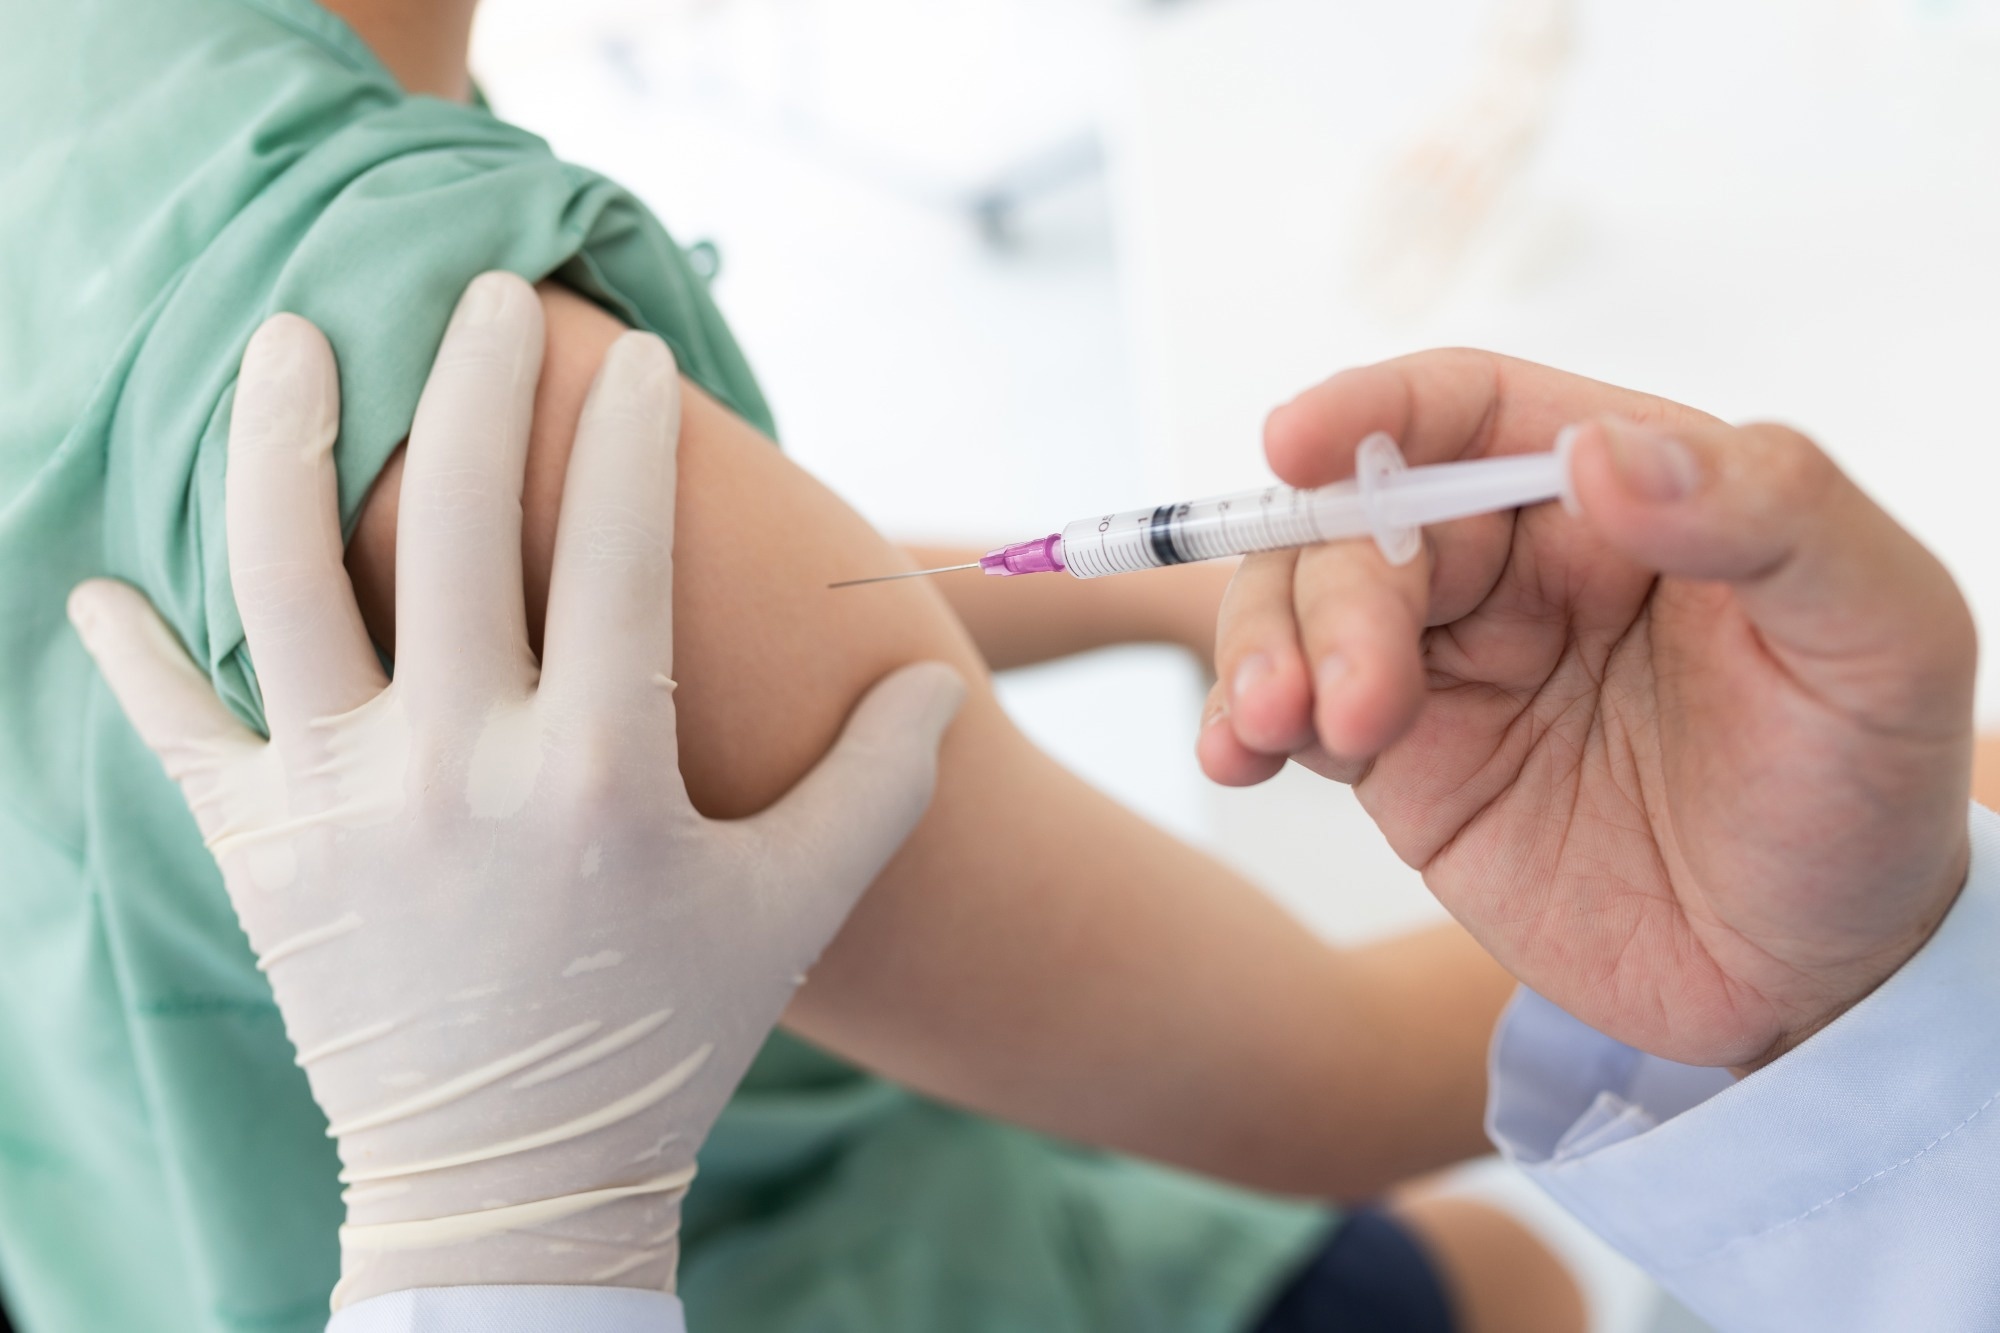 Study: Human leukocyte antigen alleles associate with COVID-19 vaccine immunogenicity and risk of breakthrough infection. Image Credit: Tong_stocker/Shutterstock